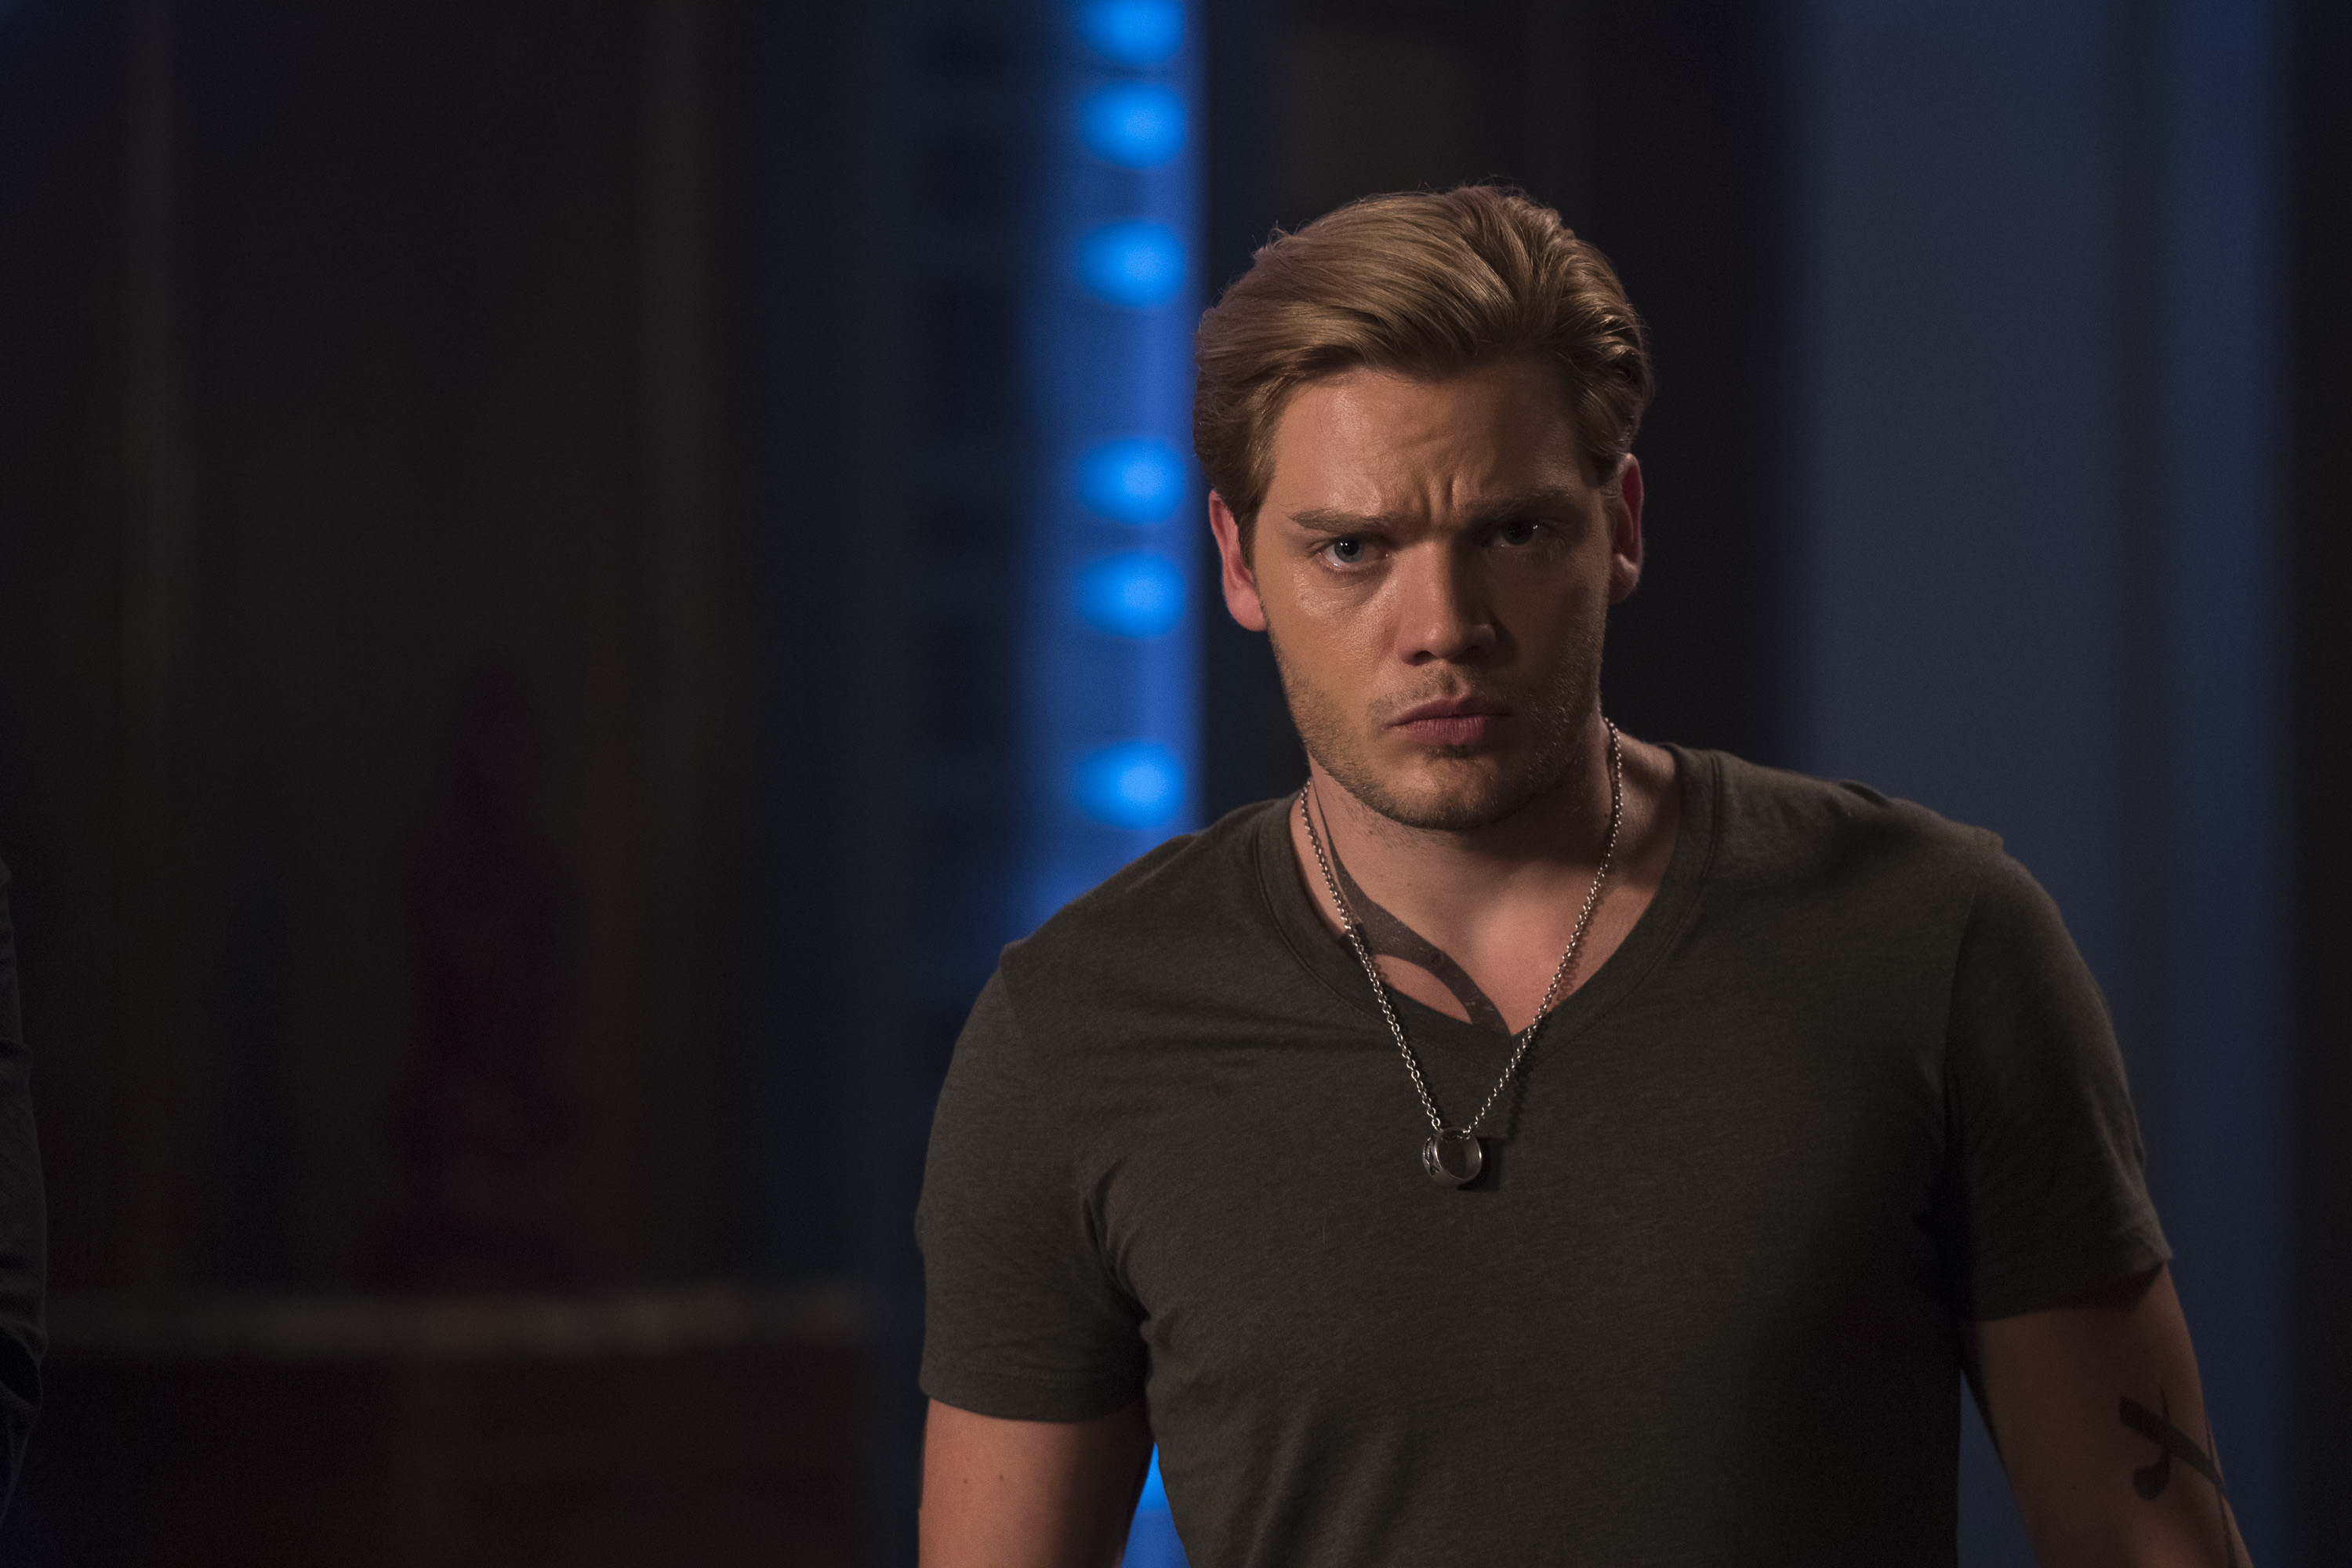 the mortal instruments city of bones jace real name